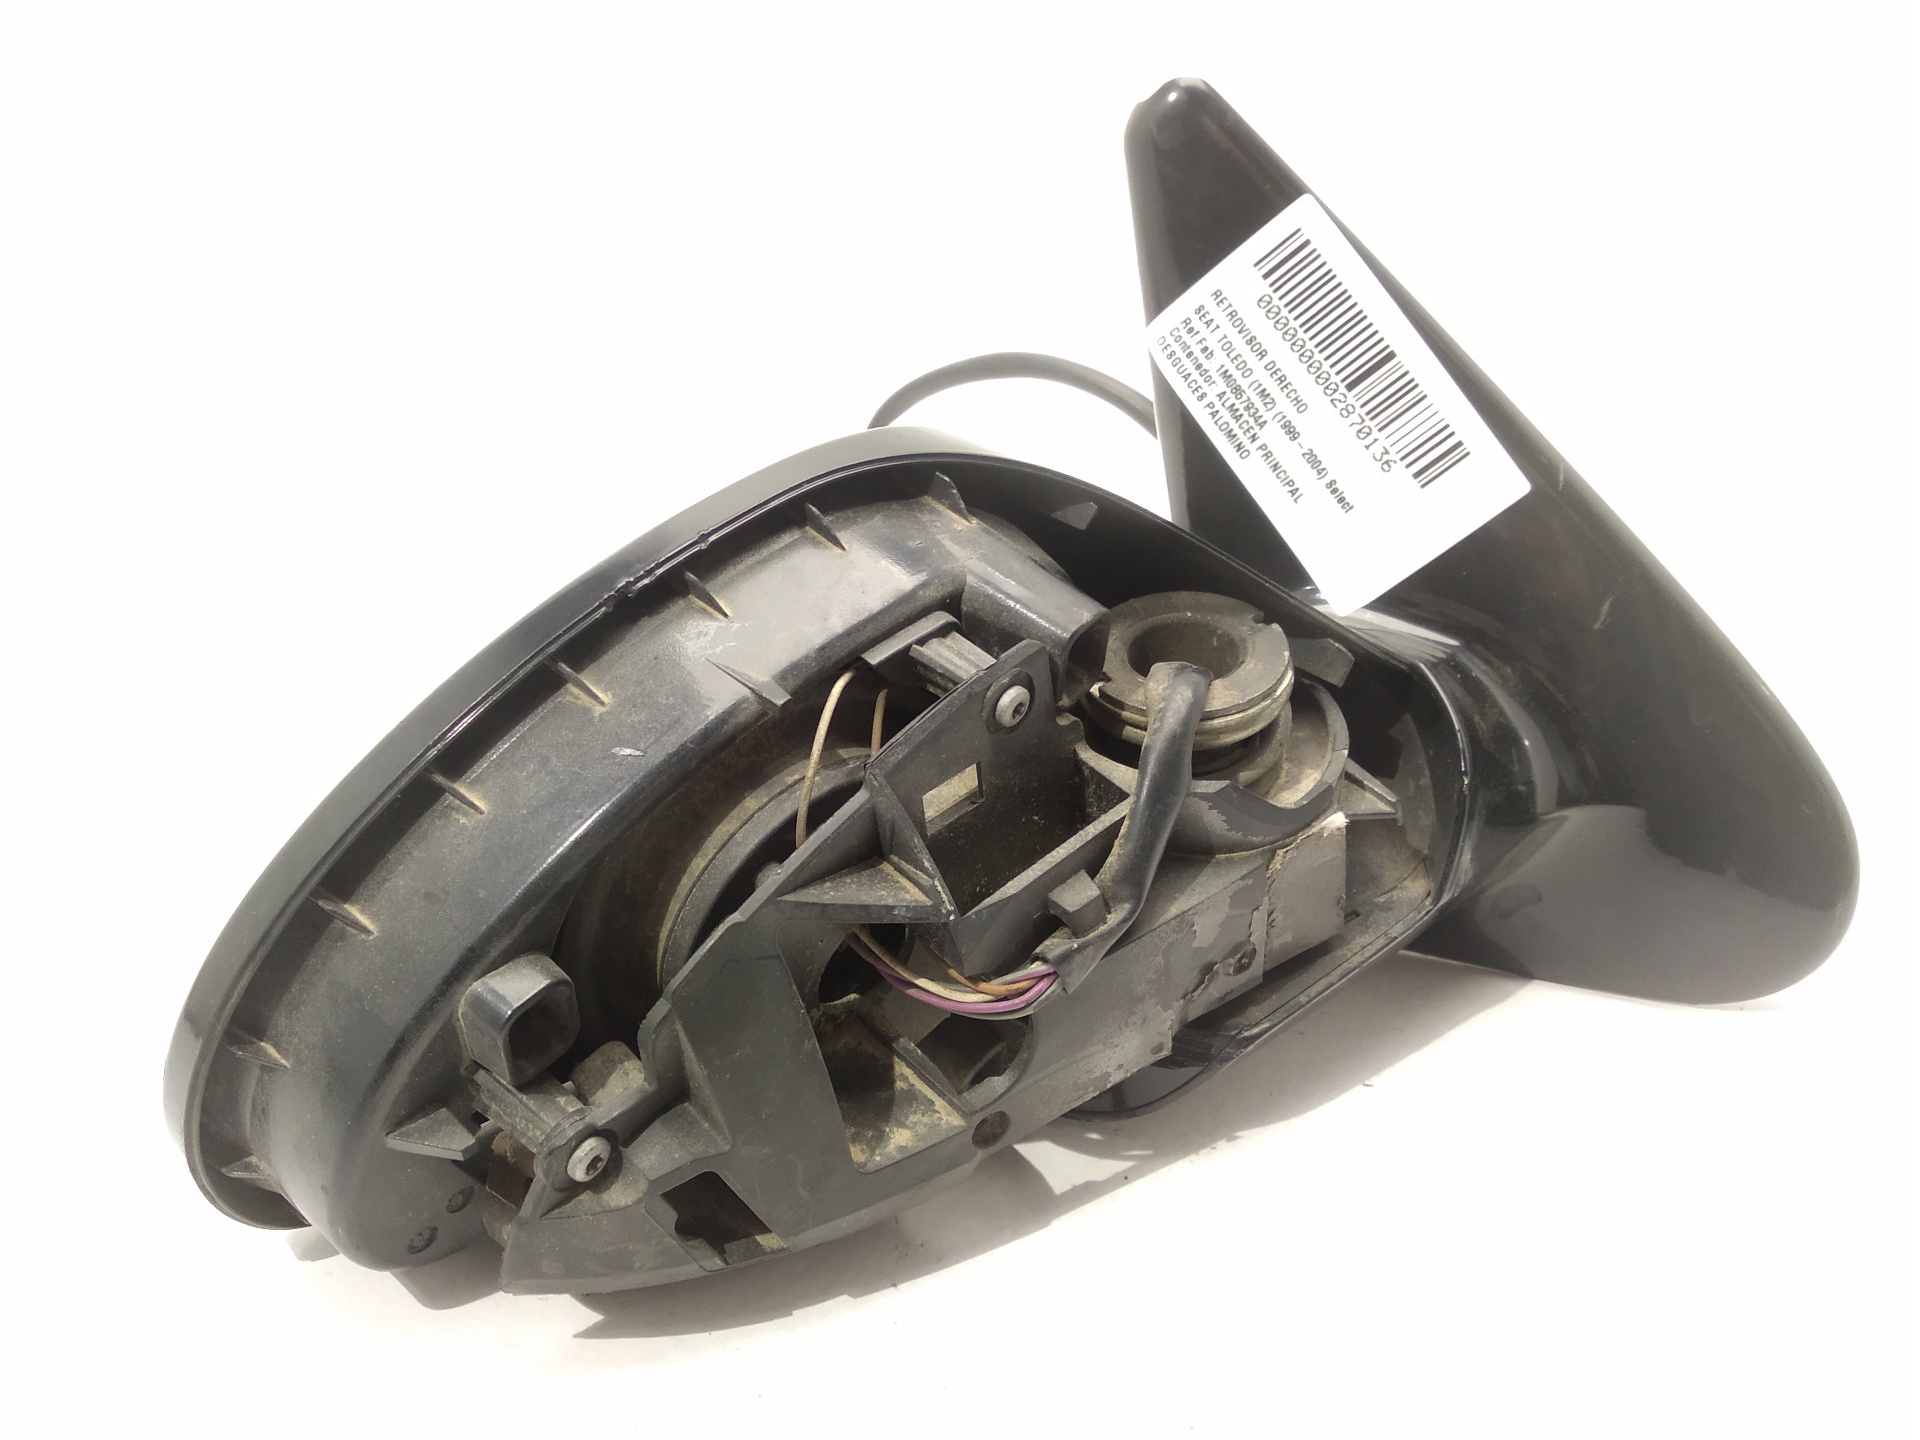 SEAT Toledo 2 generation (1999-2006) Right Side Wing Mirror 1M0857934A, 1M0857934A, 1M0857934A 24018032